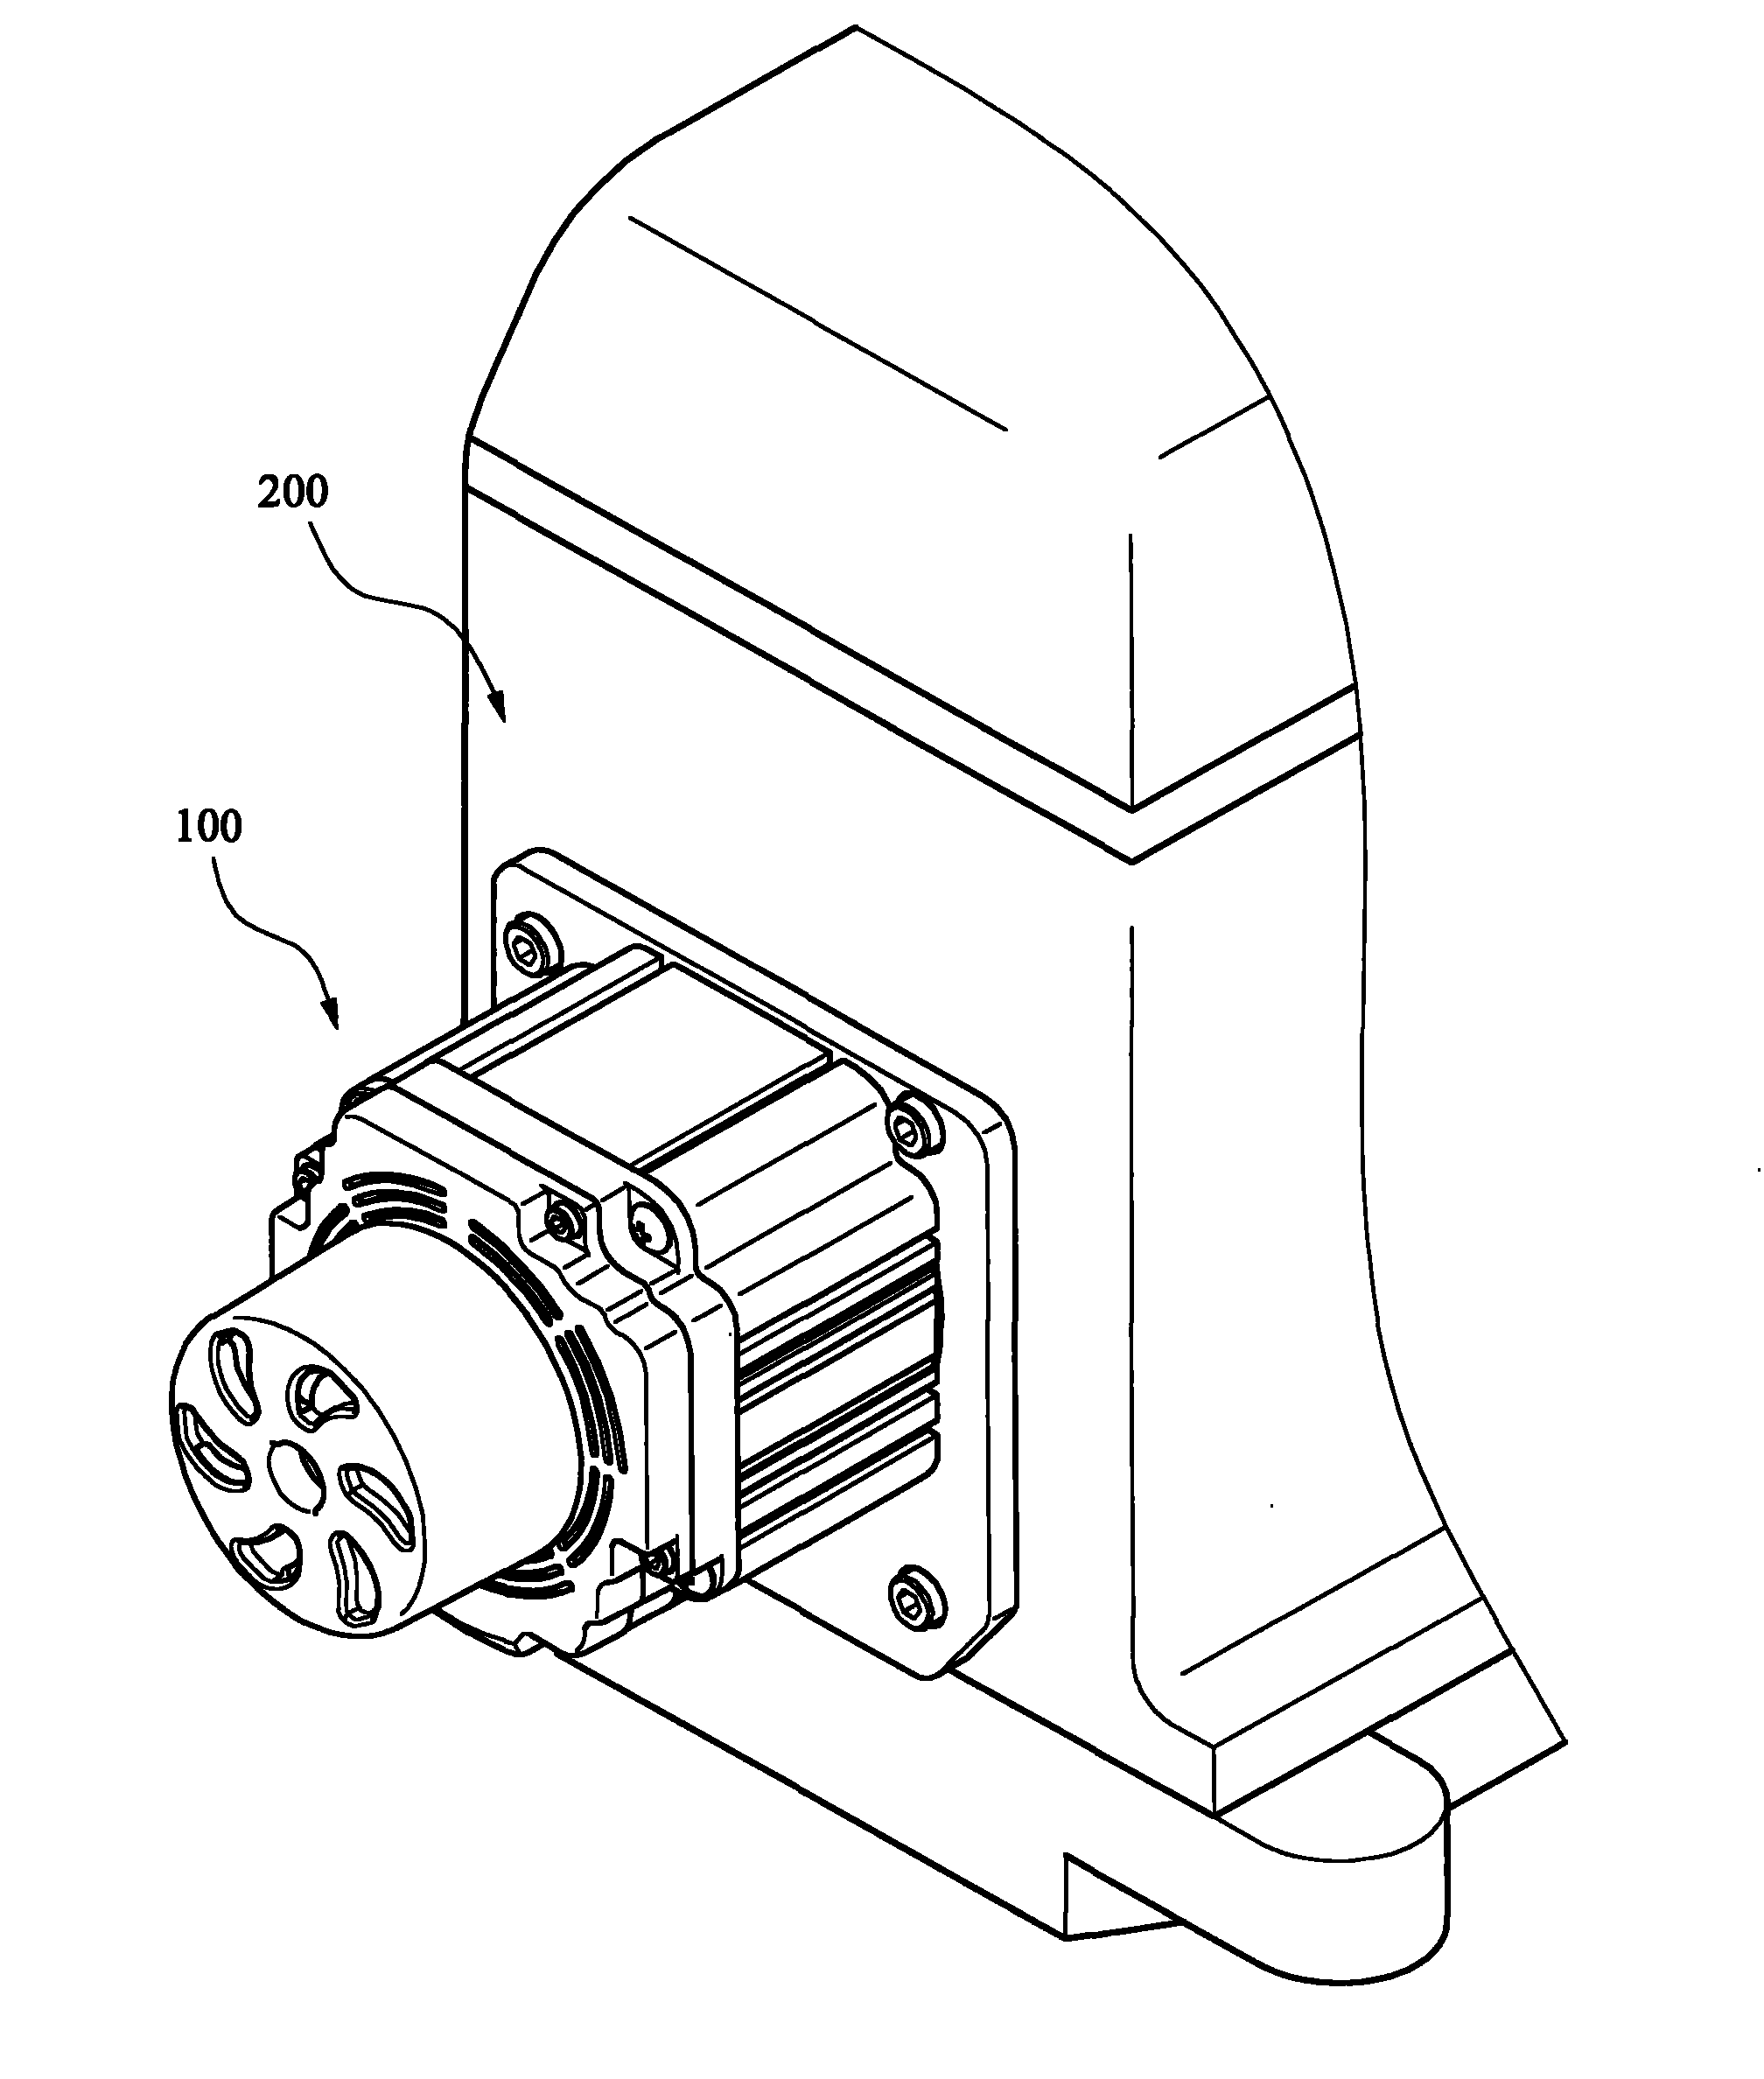 Assembly structure of motor